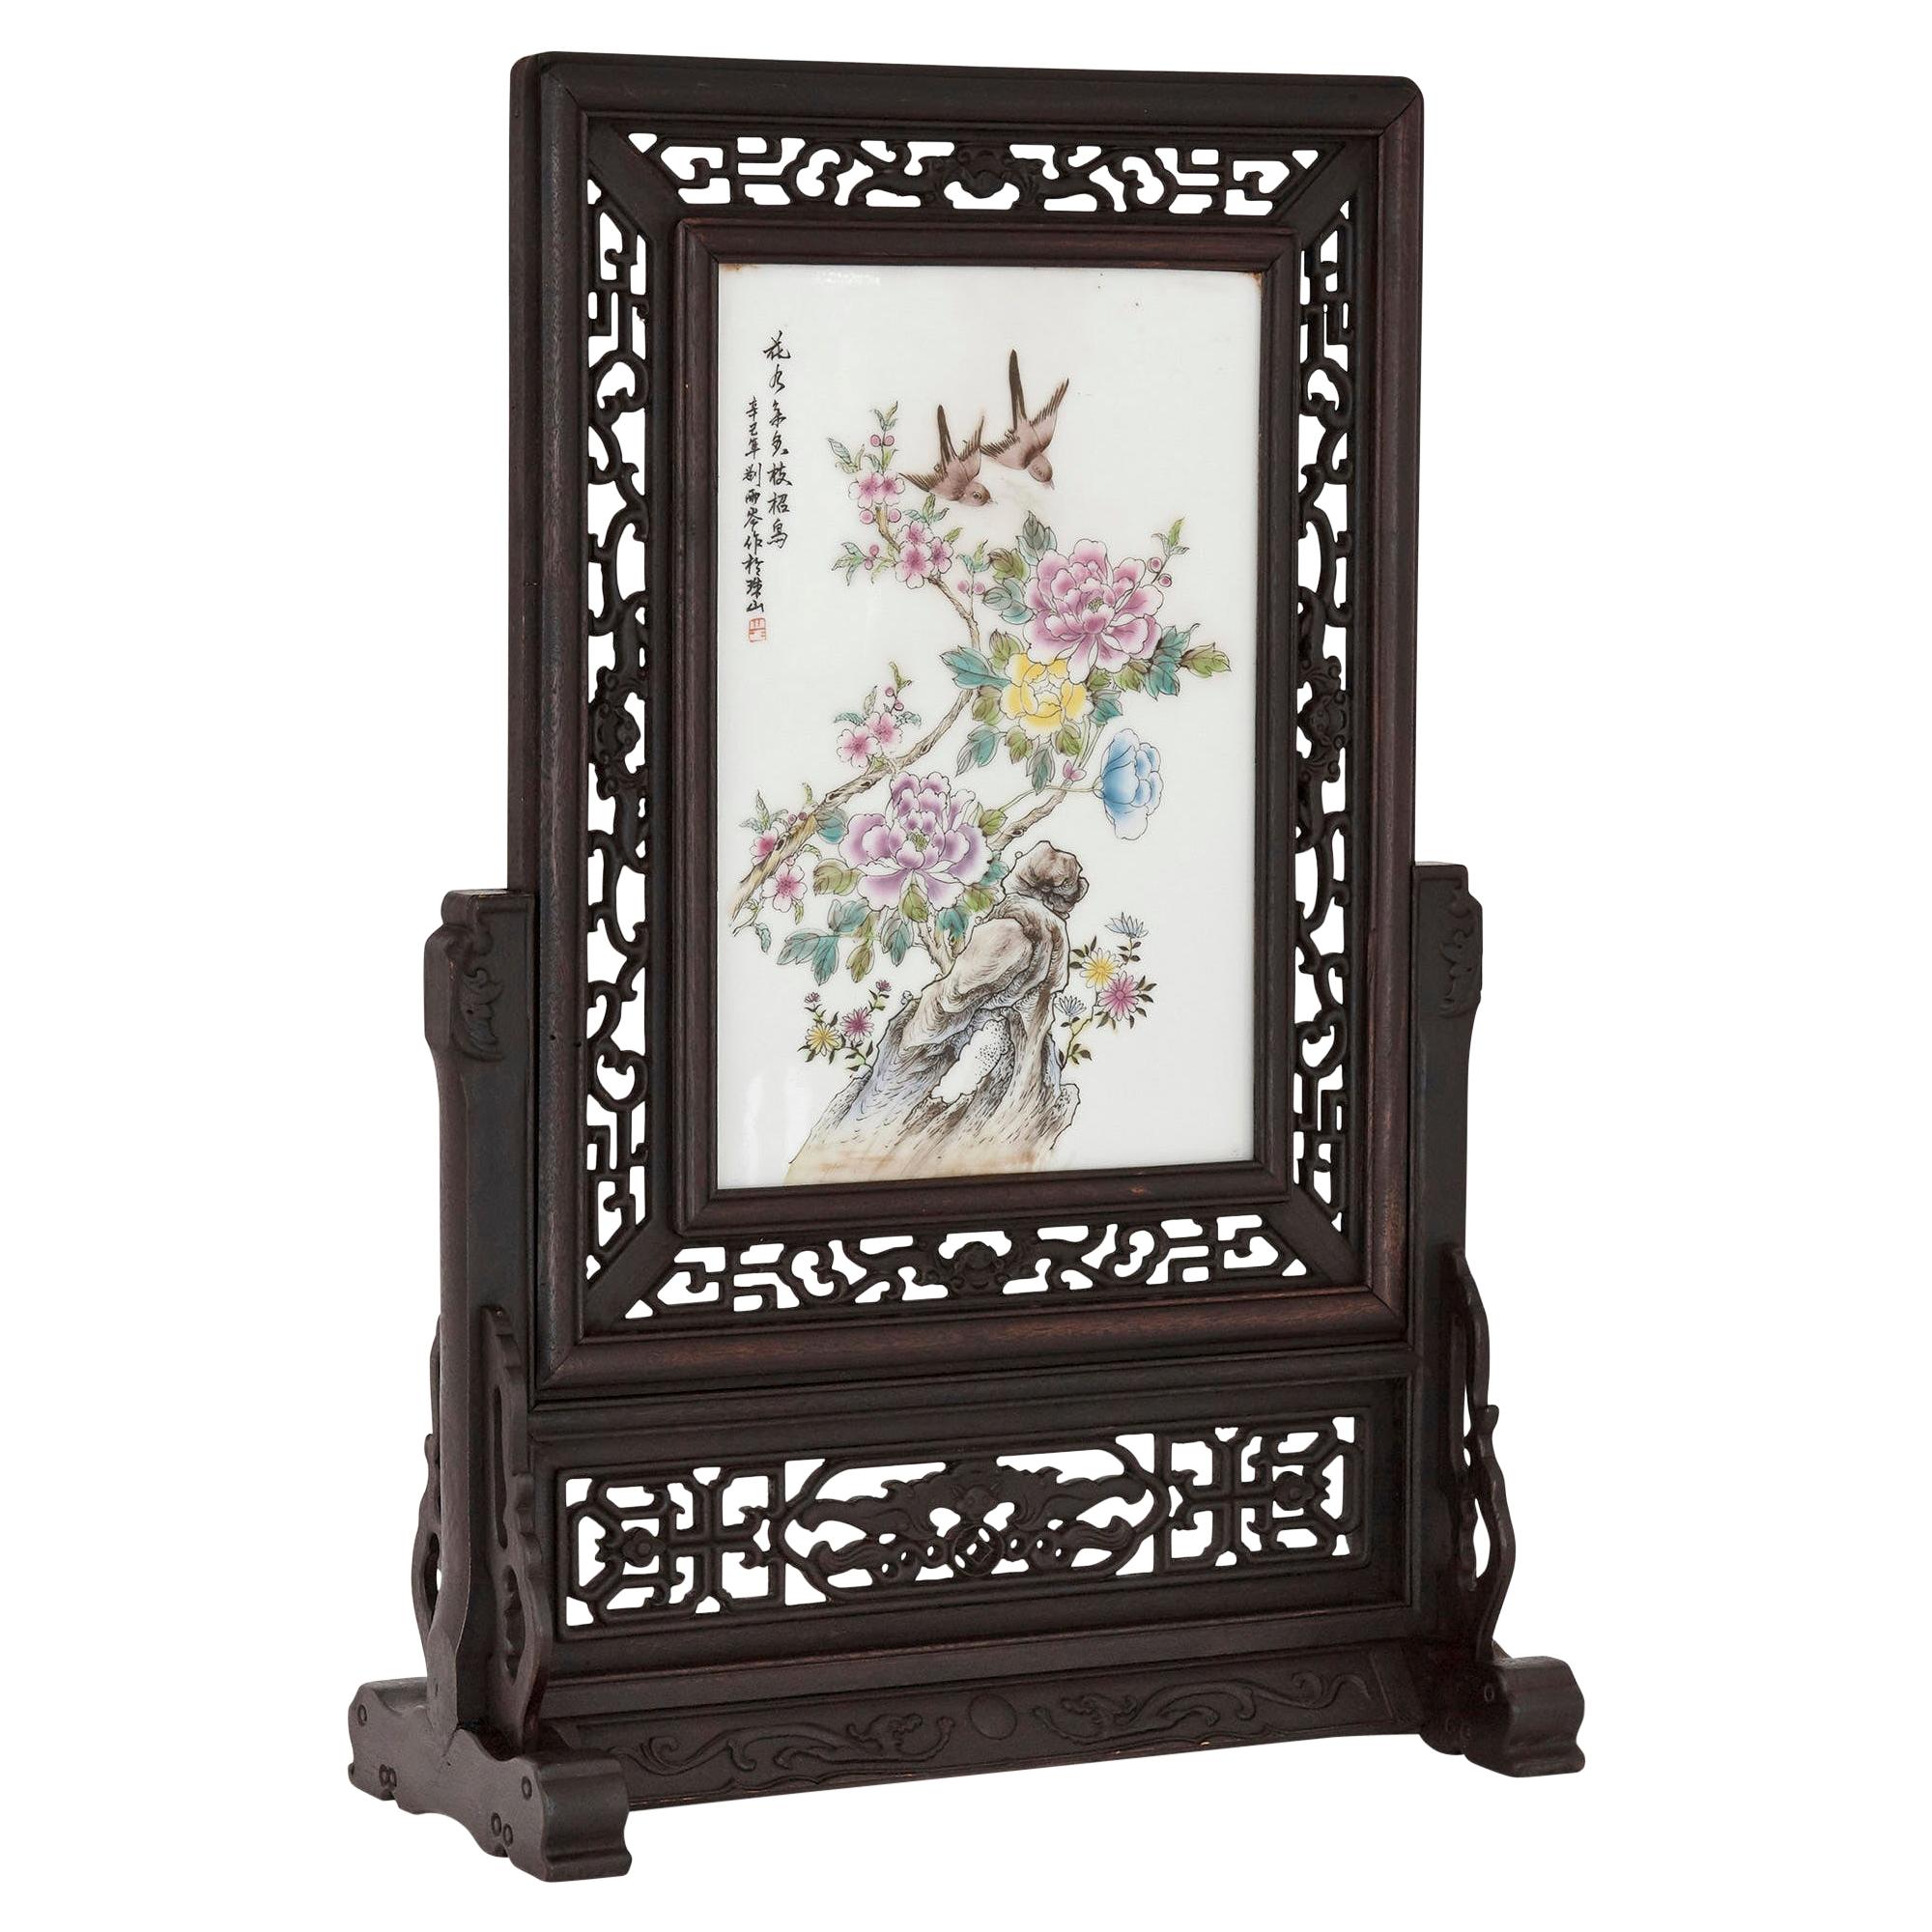 Hardwood and Painted Porcelain Chinese Screen